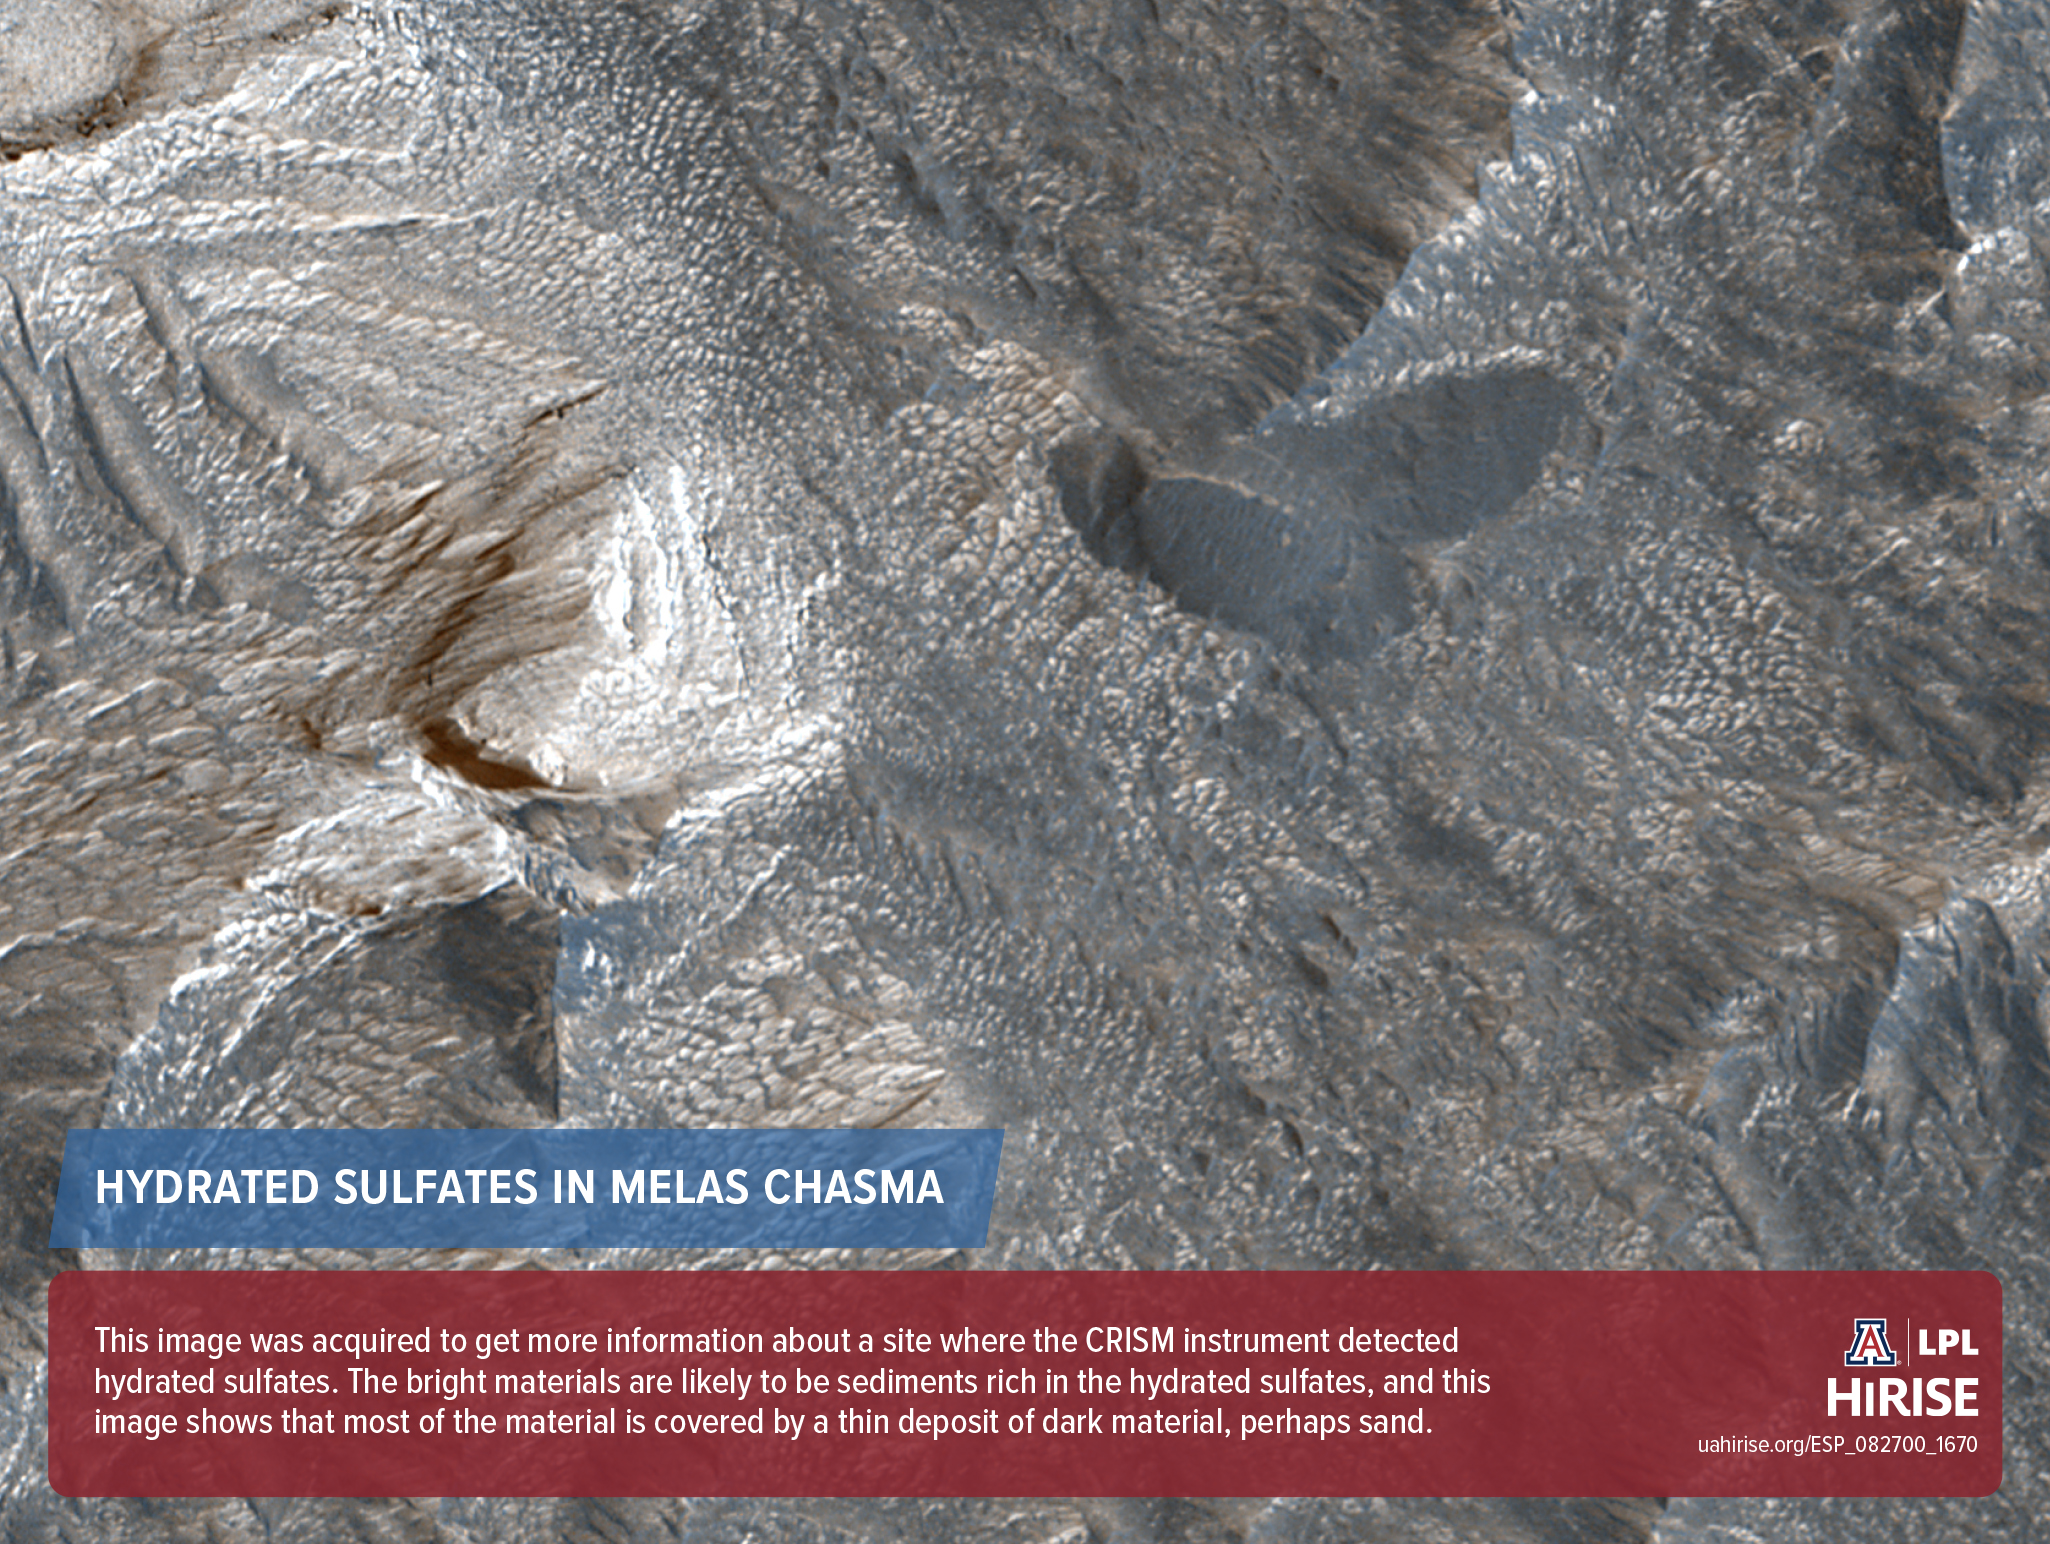 Hydrated Sulfates in Melas Chasma